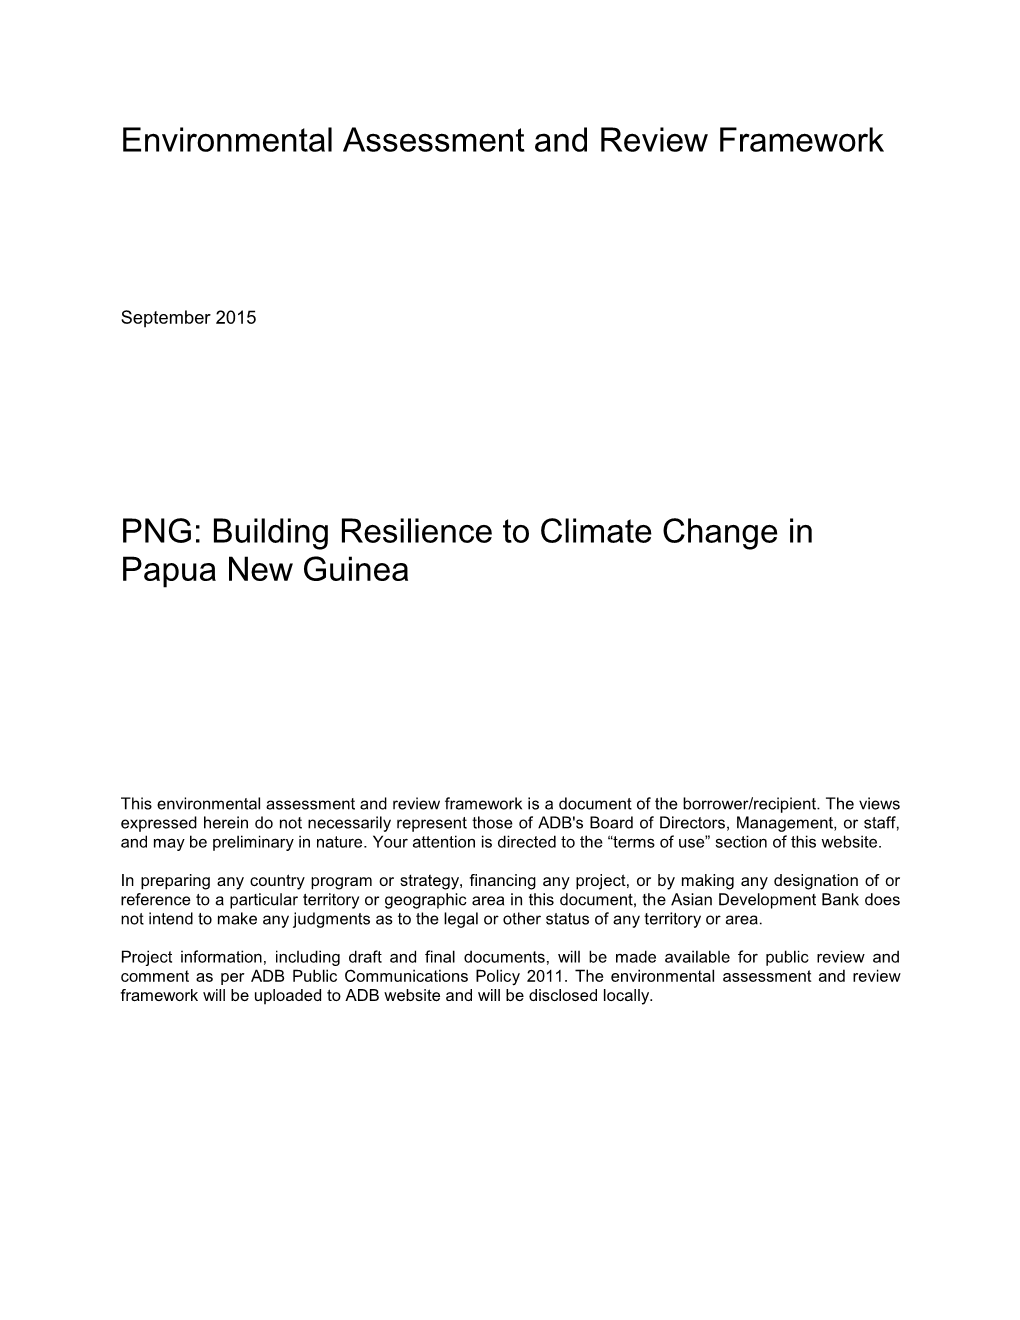 PNG: Building Resilience to Climate Change in Papua New Guinea